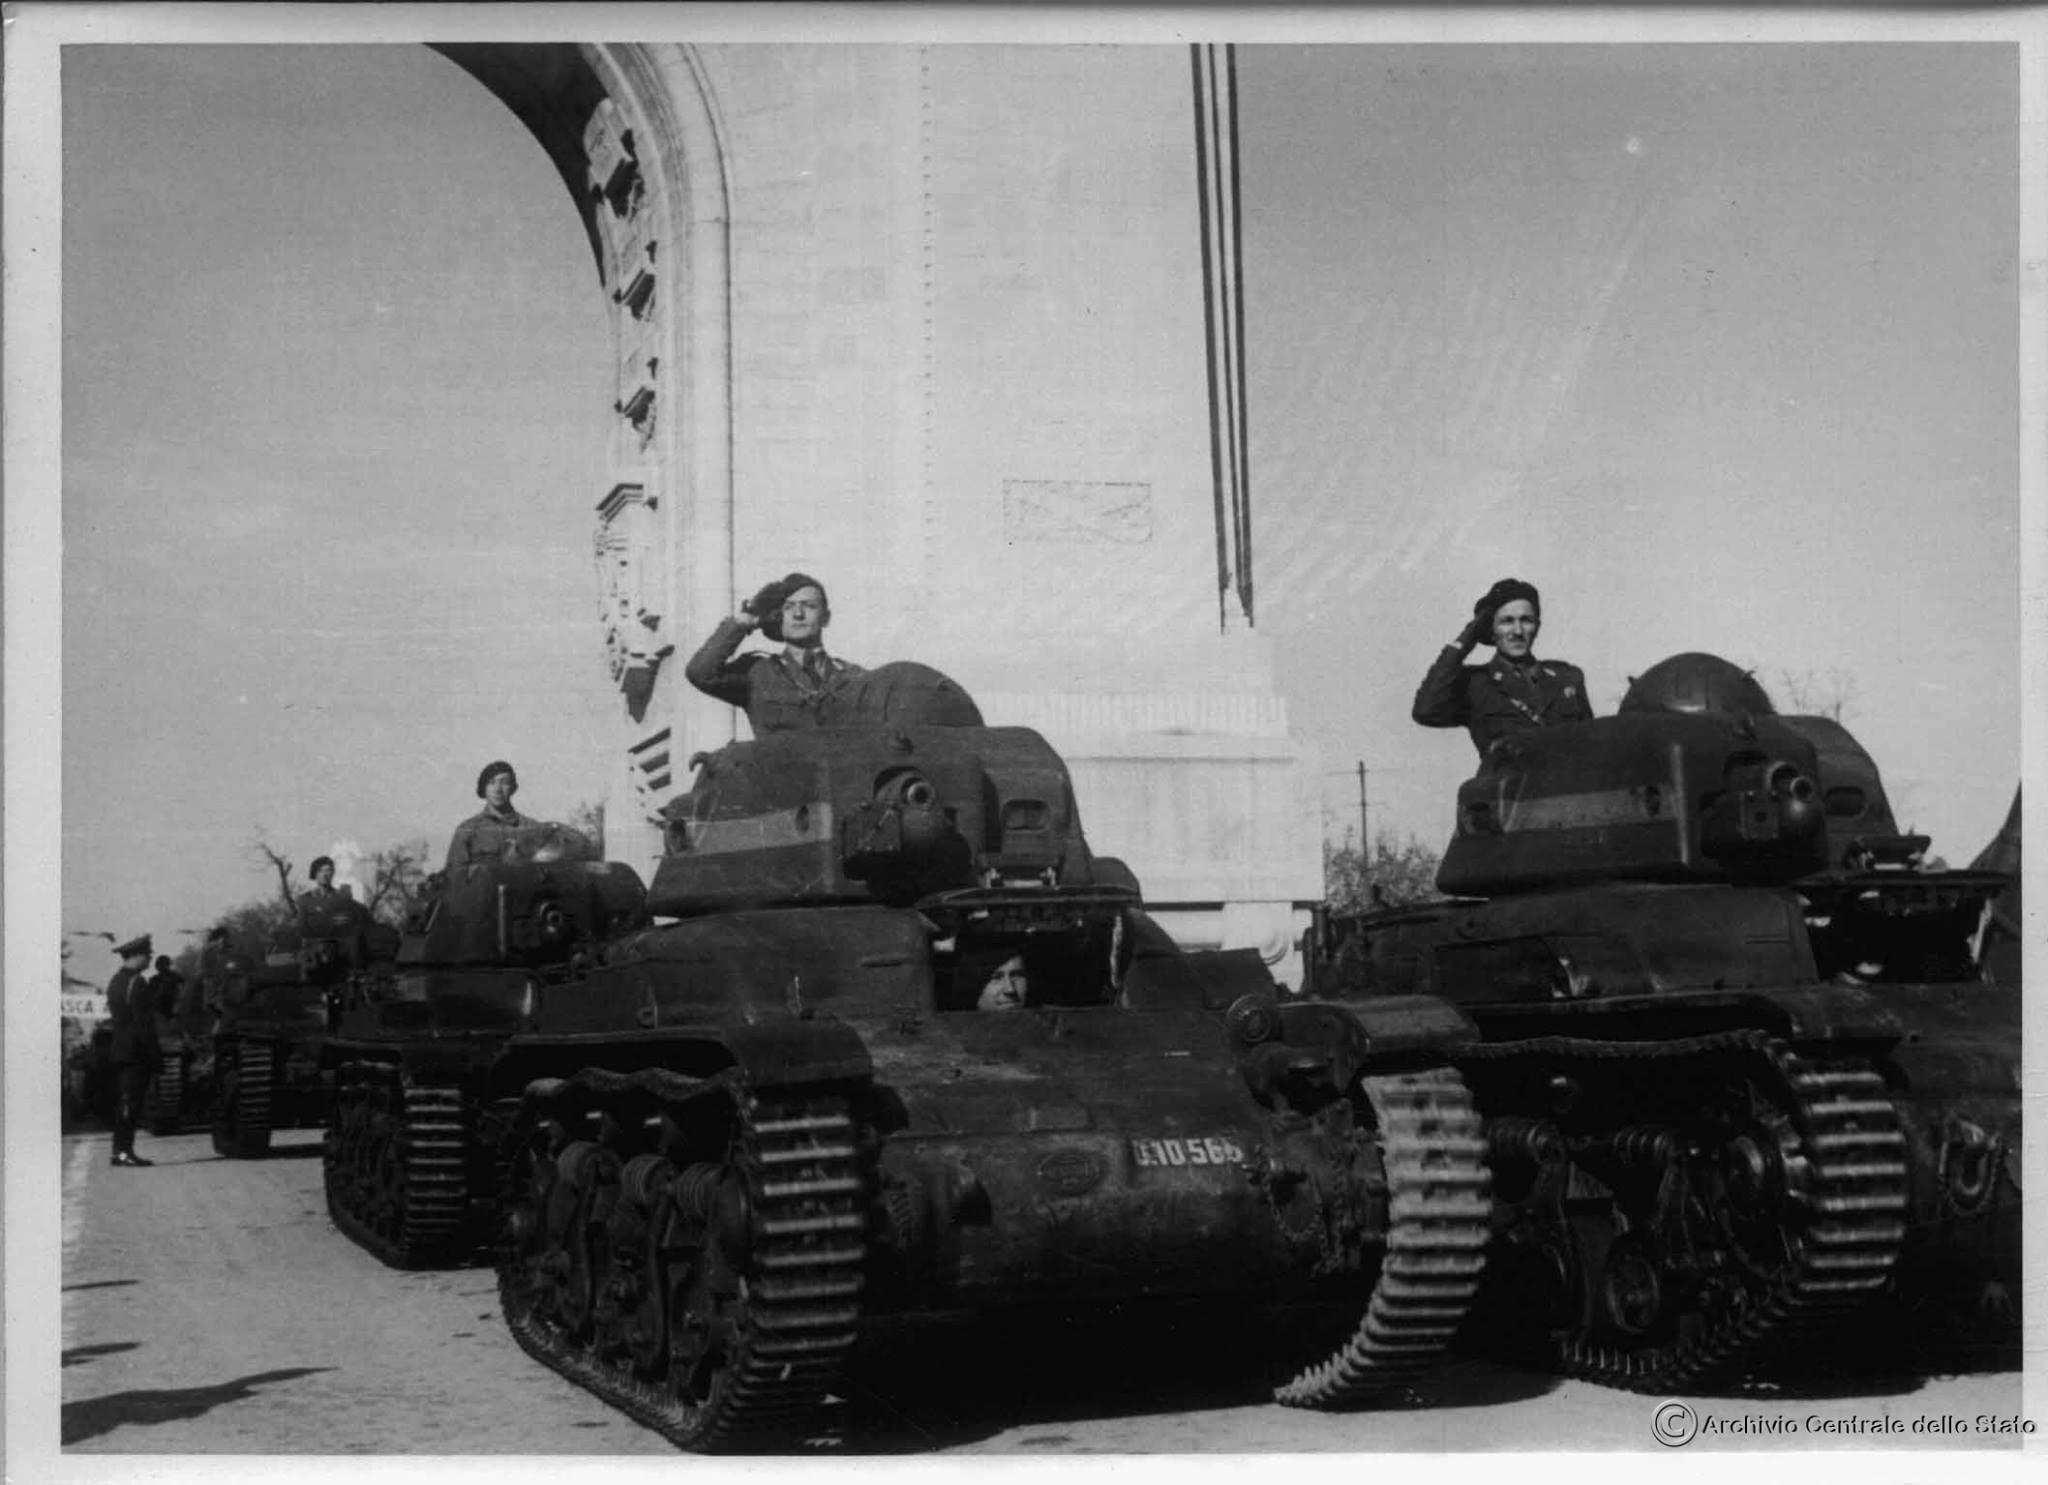 Romanian tankers parading in their Carul de Luptă R35 tanks after their successful invasion of Odessa.